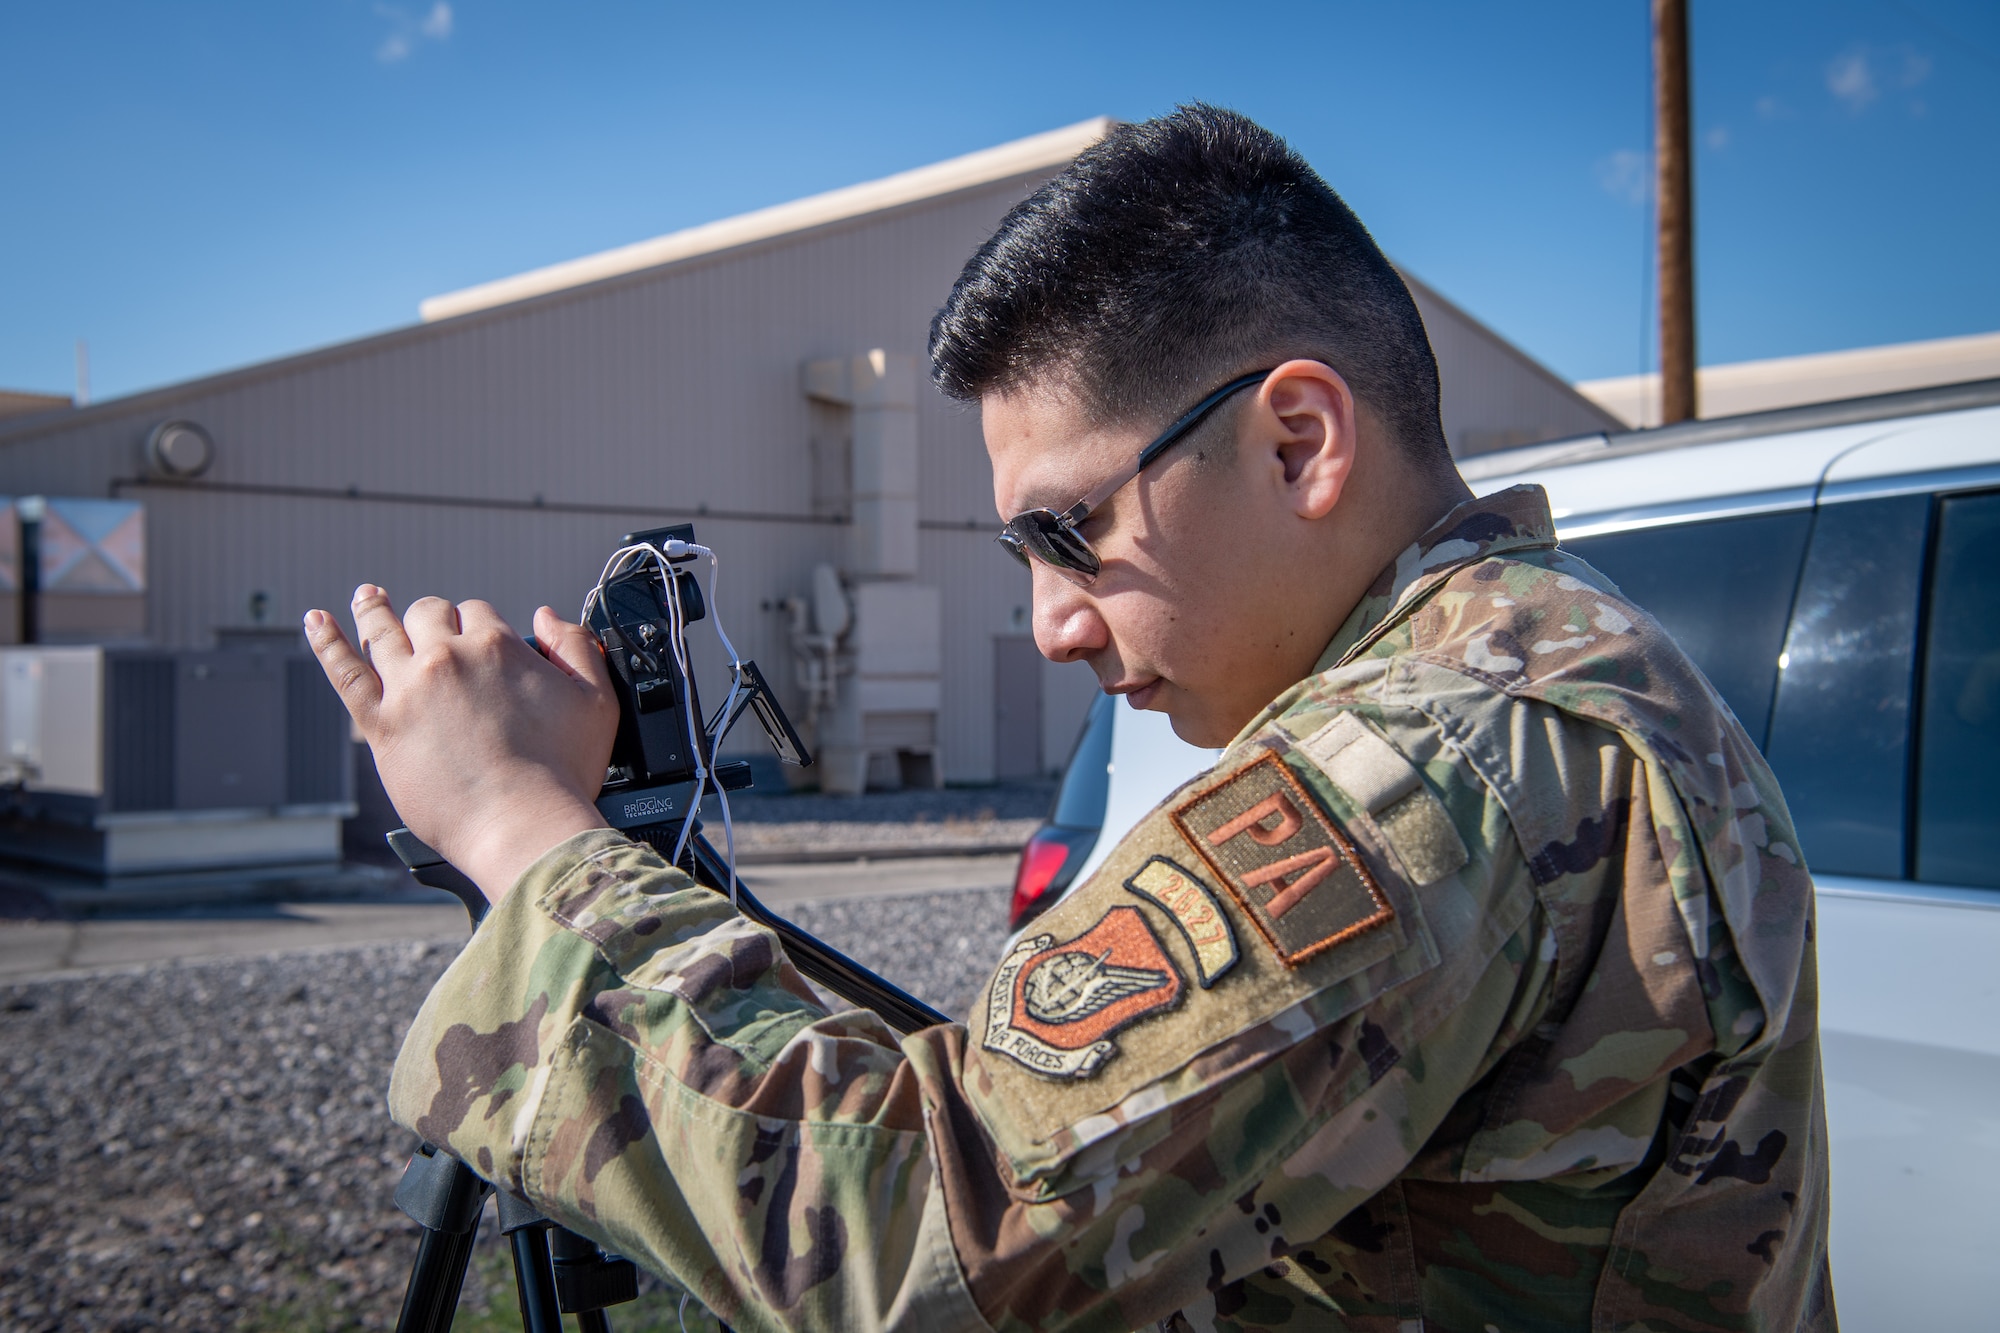 U.S. Air Force Airman First Class Moises Vasquez, 3rd Air Expeditionary Wing Public Affairs journeyman, documents an interview in support of Exercise Bamboo Eagle 24-1 at Nellis Air Force Base, Nevada, Jan. 25 2024.